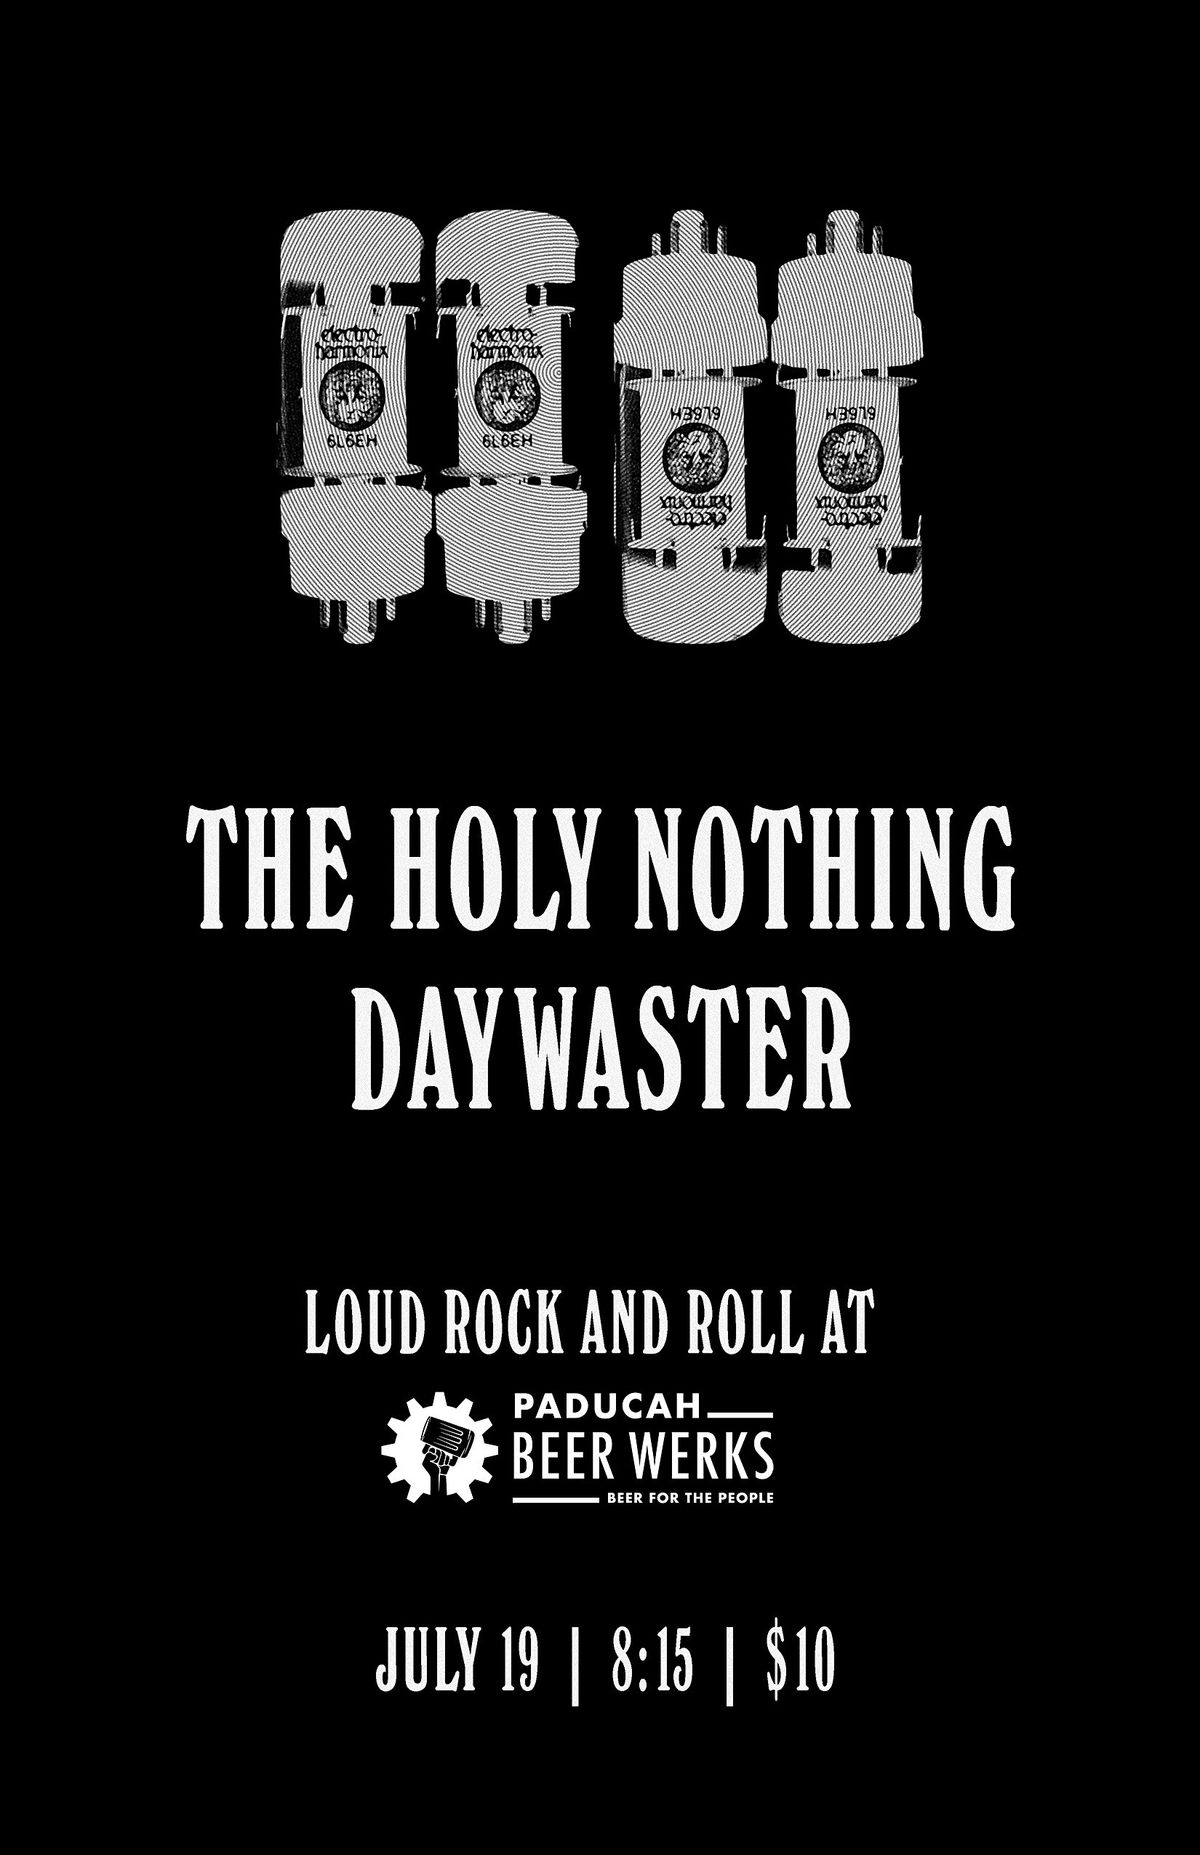 Daywaster & The Church of The Holy Nothing at PBW